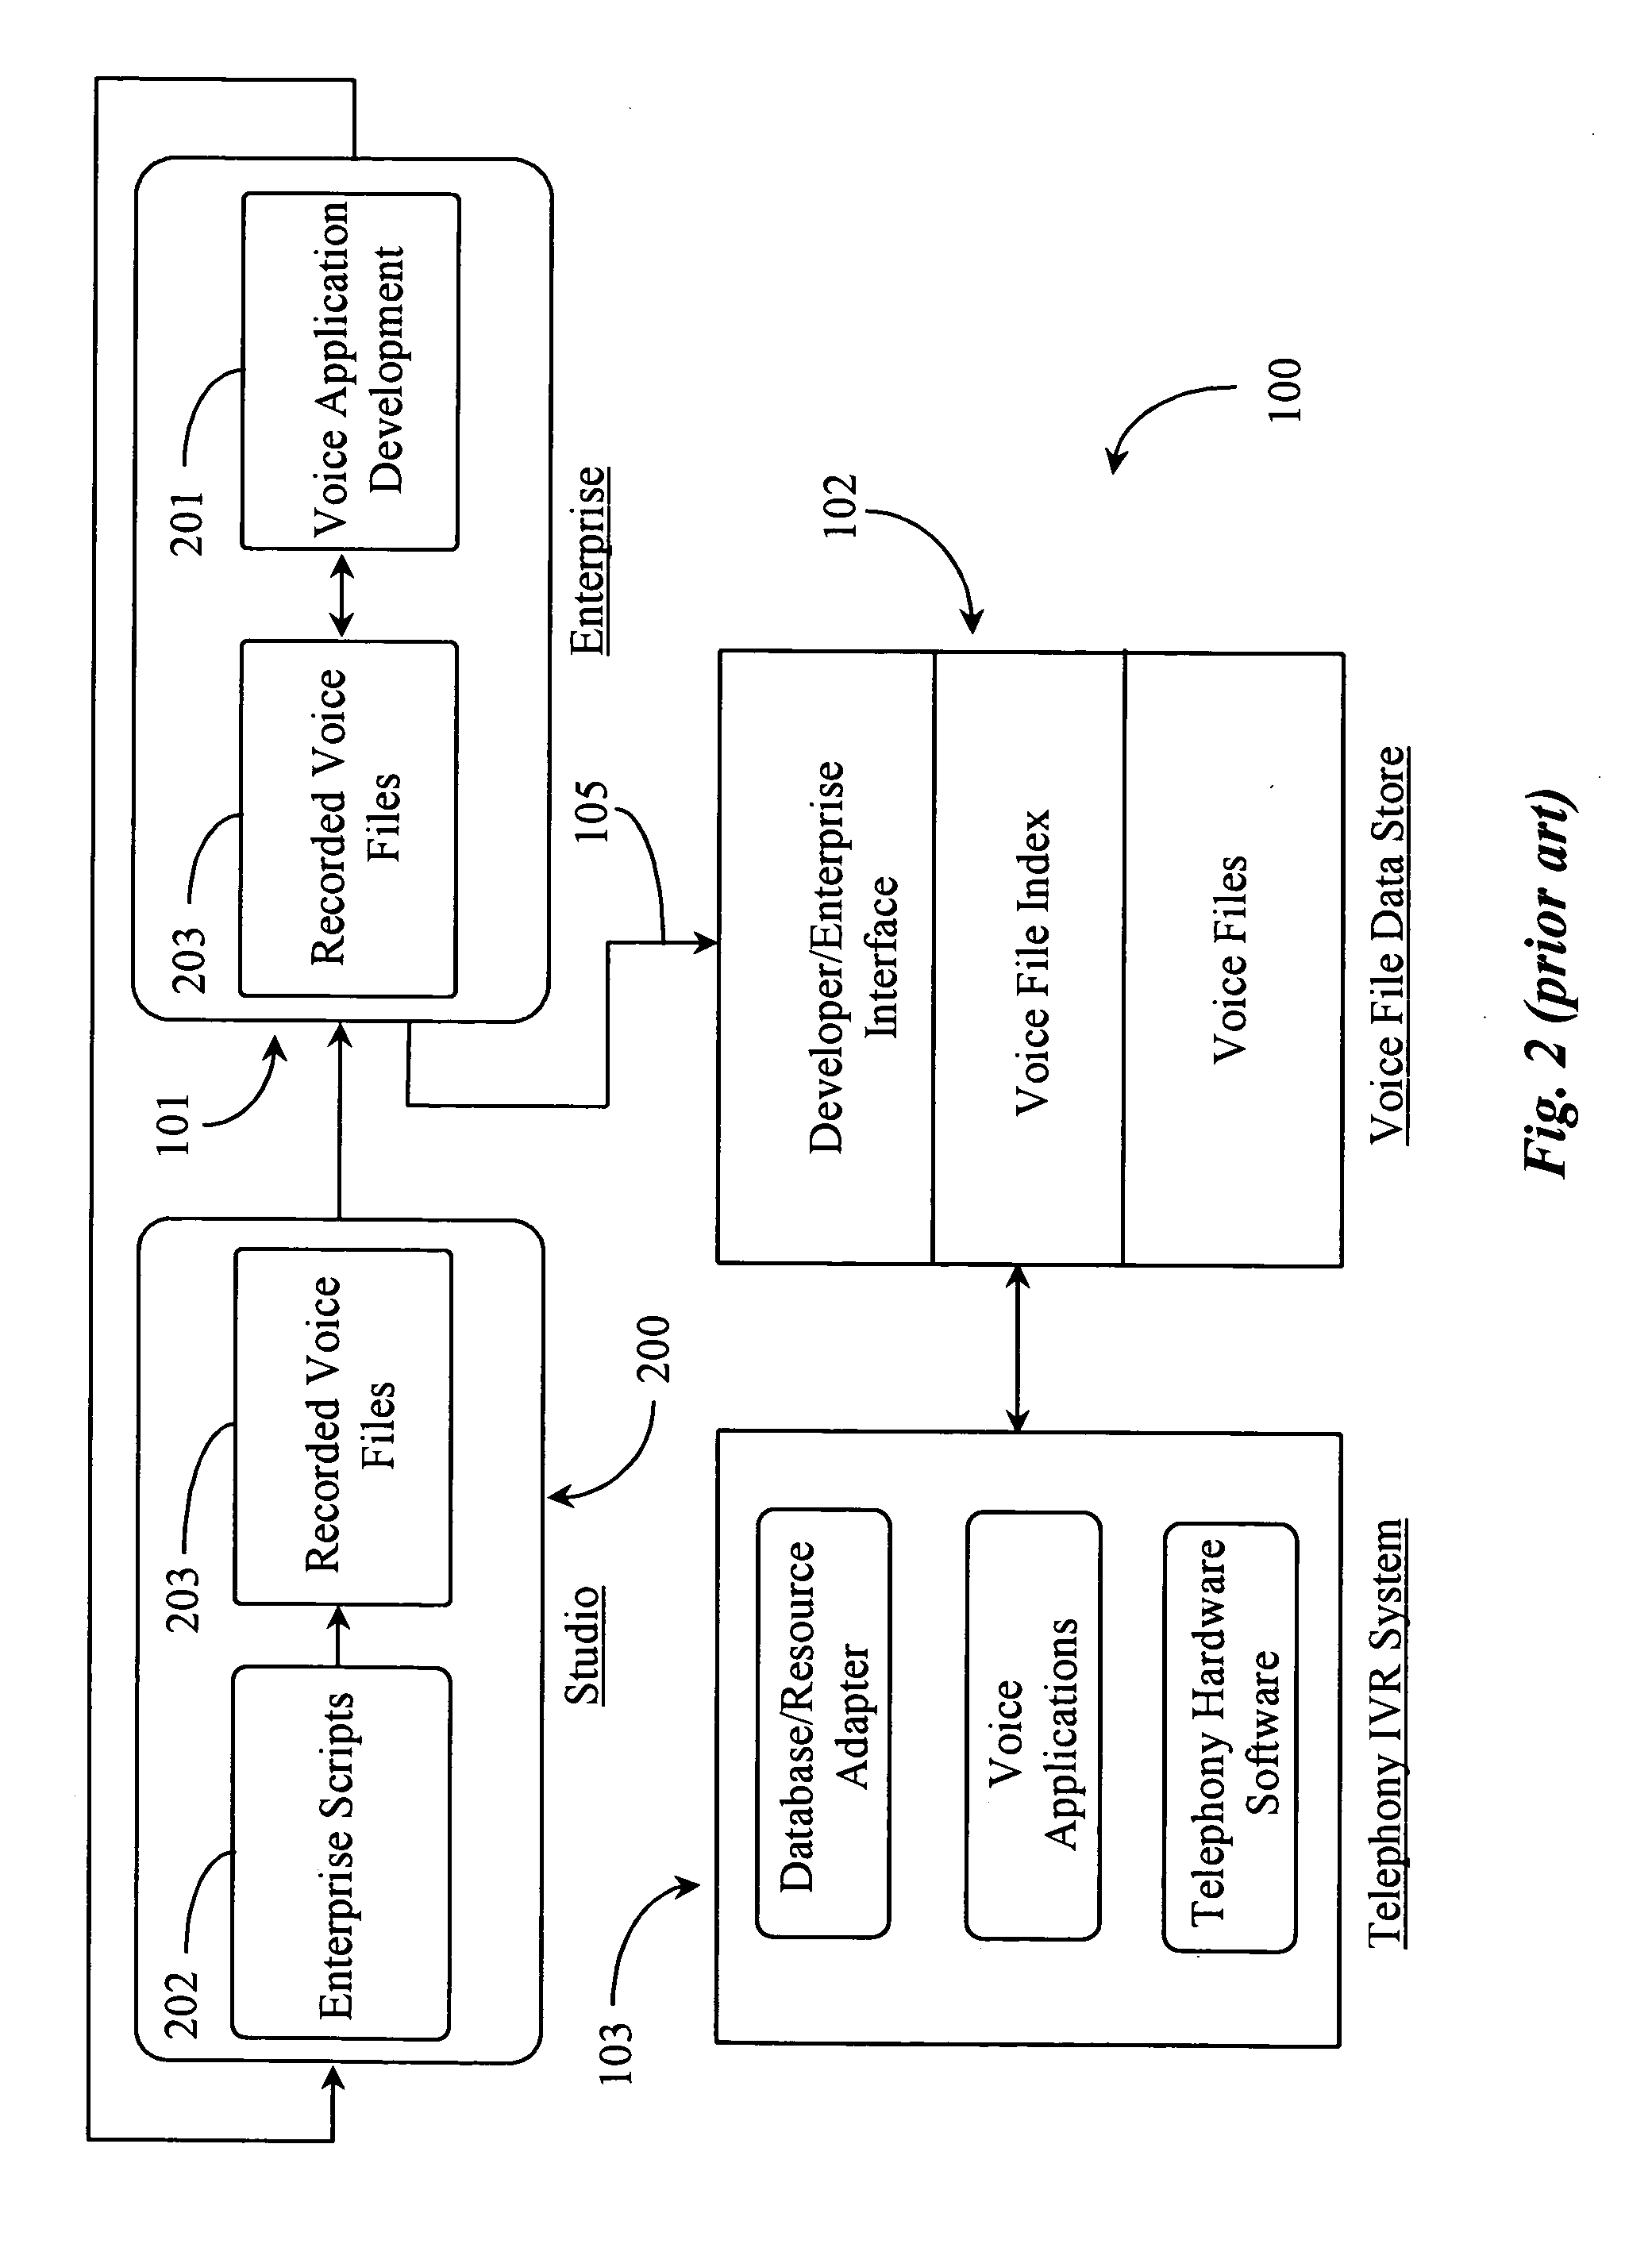 Method for creating and deploying system changes in a voice application system